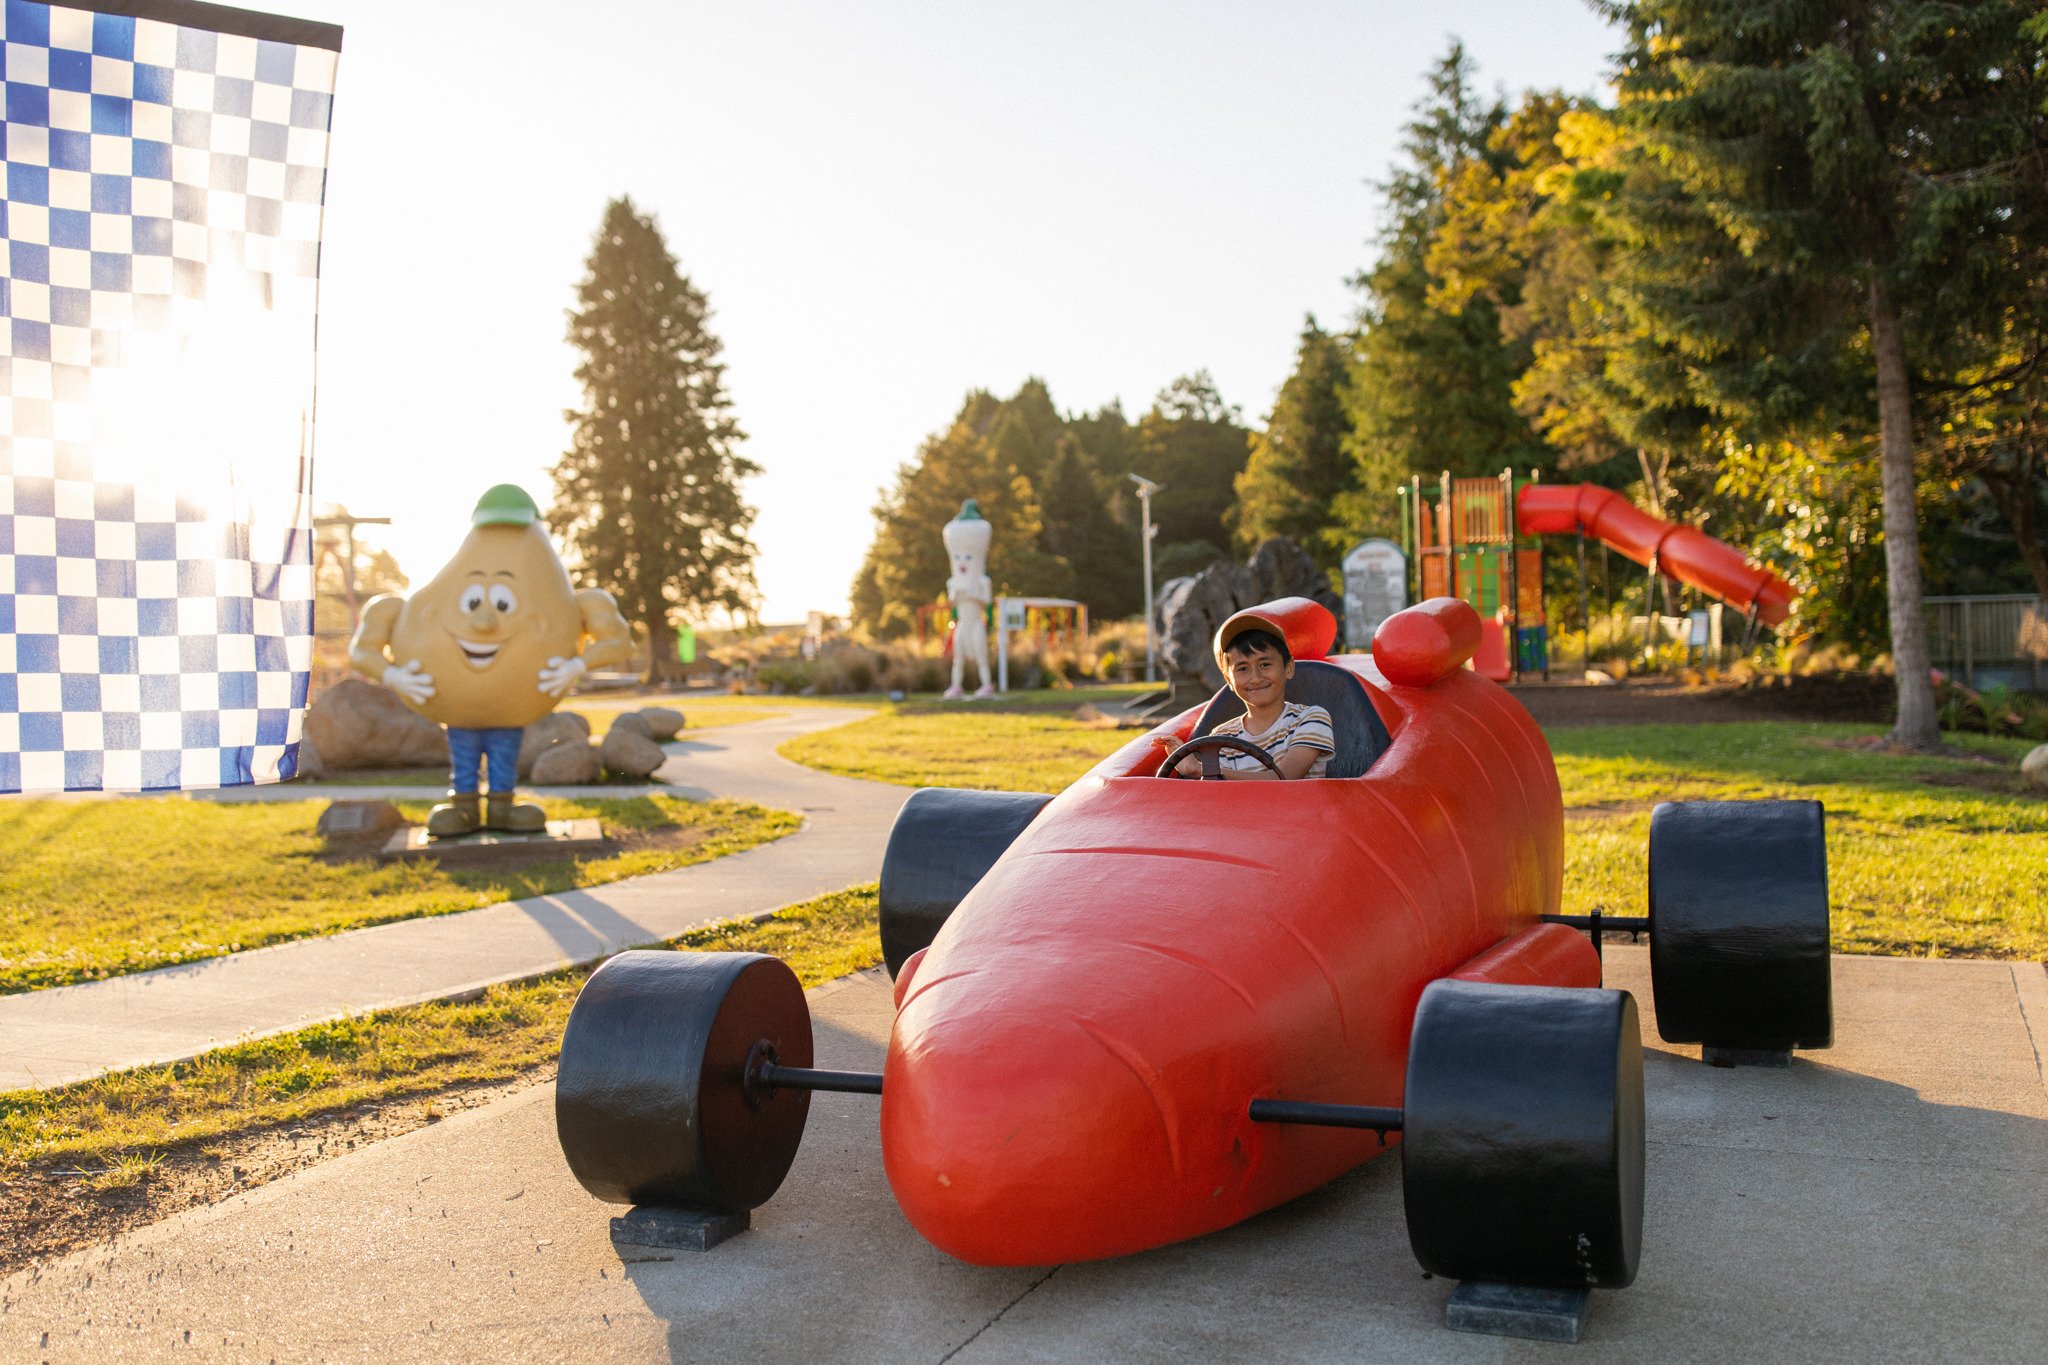 Kid Playing in the Carrot Rocket at the Ohakune Carrot Adventure Park - Visit Ruapehu.jpg